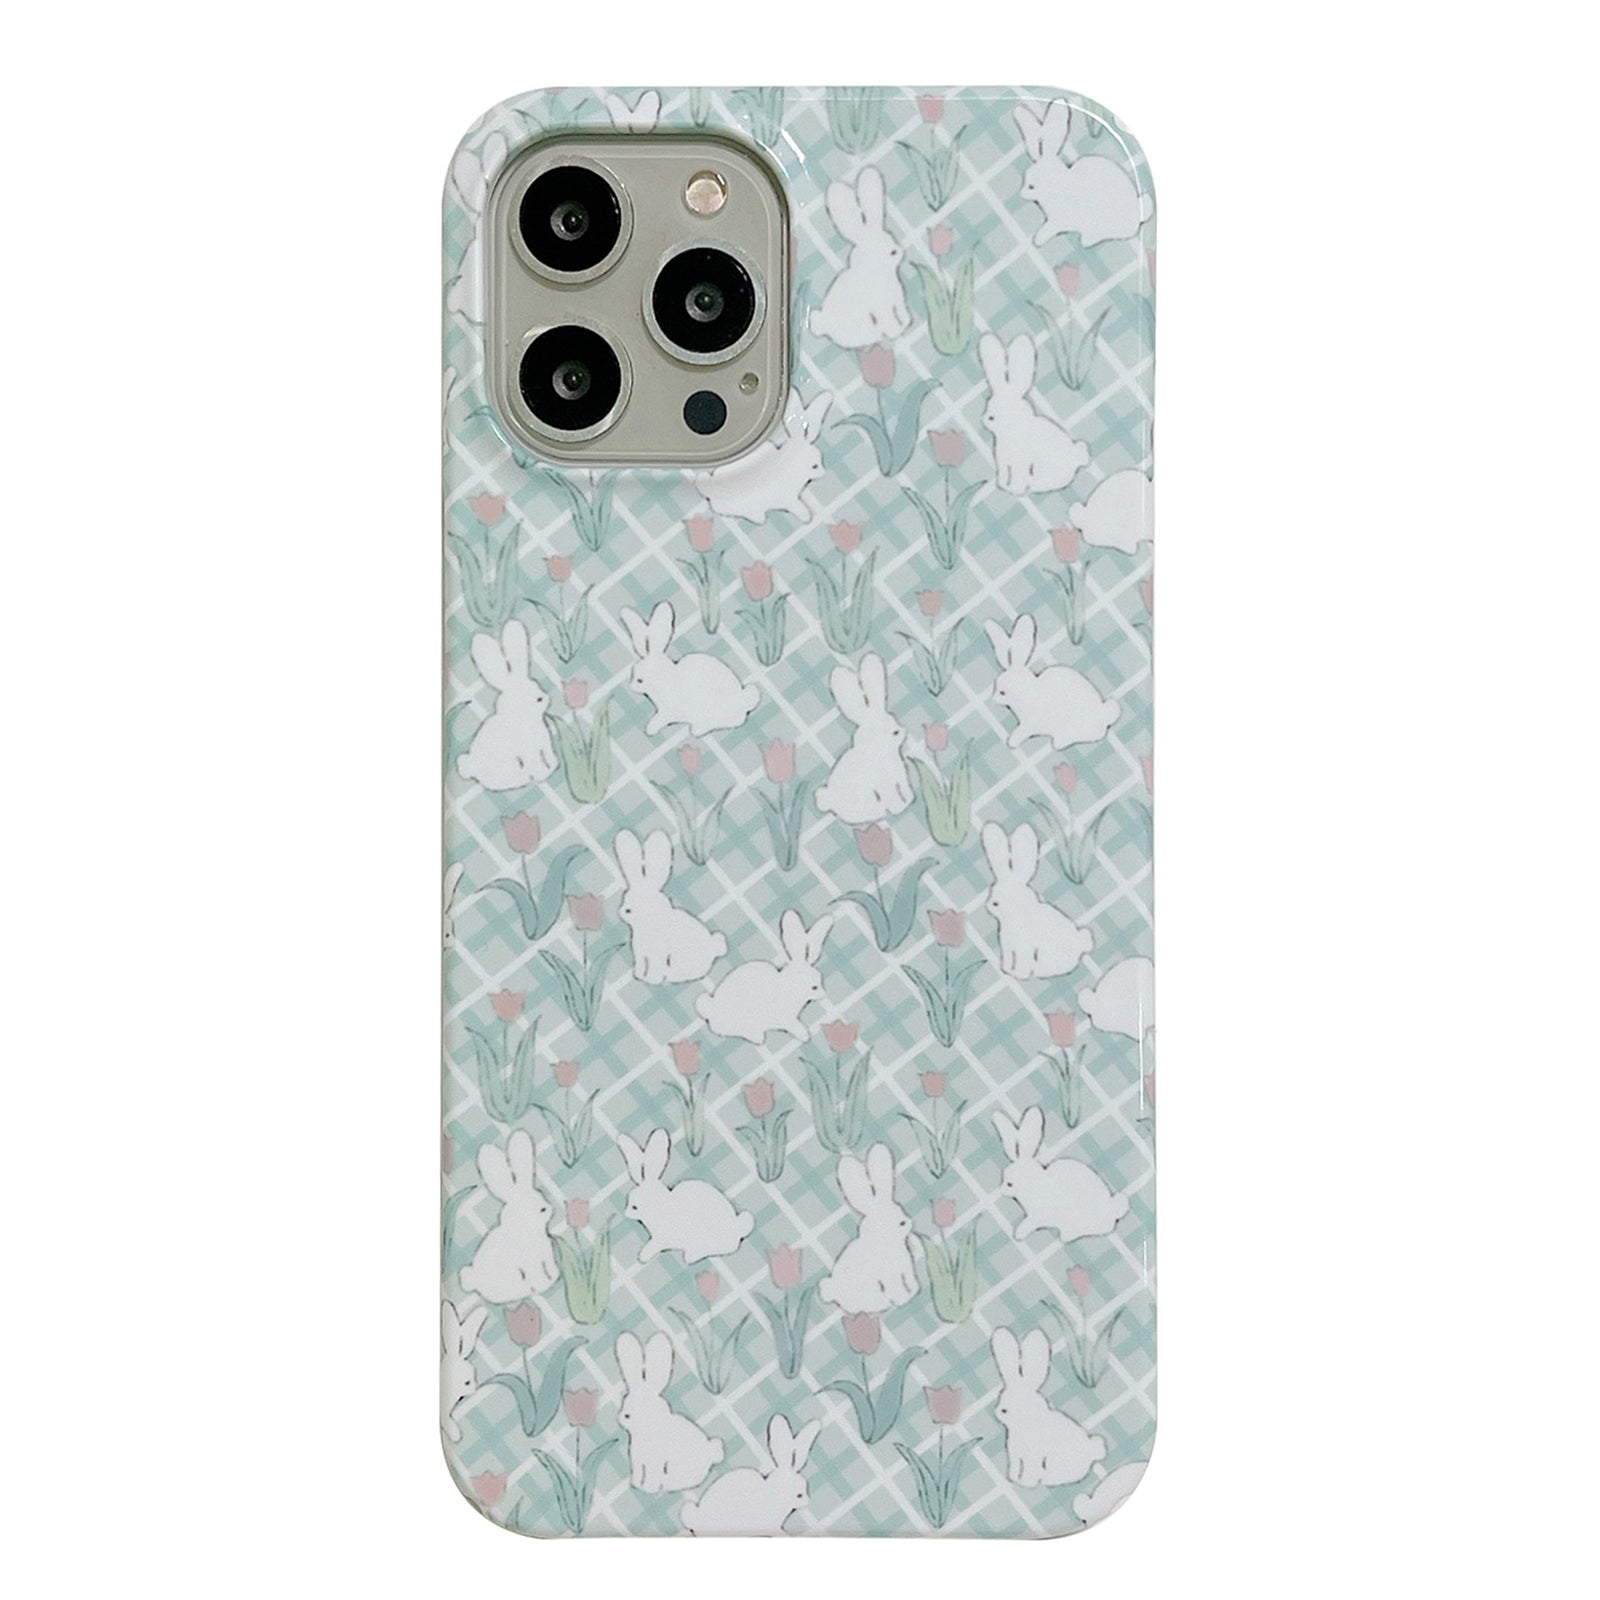 Hard PC Phone Cover for iPhone 12 Pro 6.1 inch Pattern Printing Anti-Drop Glossy Phone Case - Tulip and Rabbit